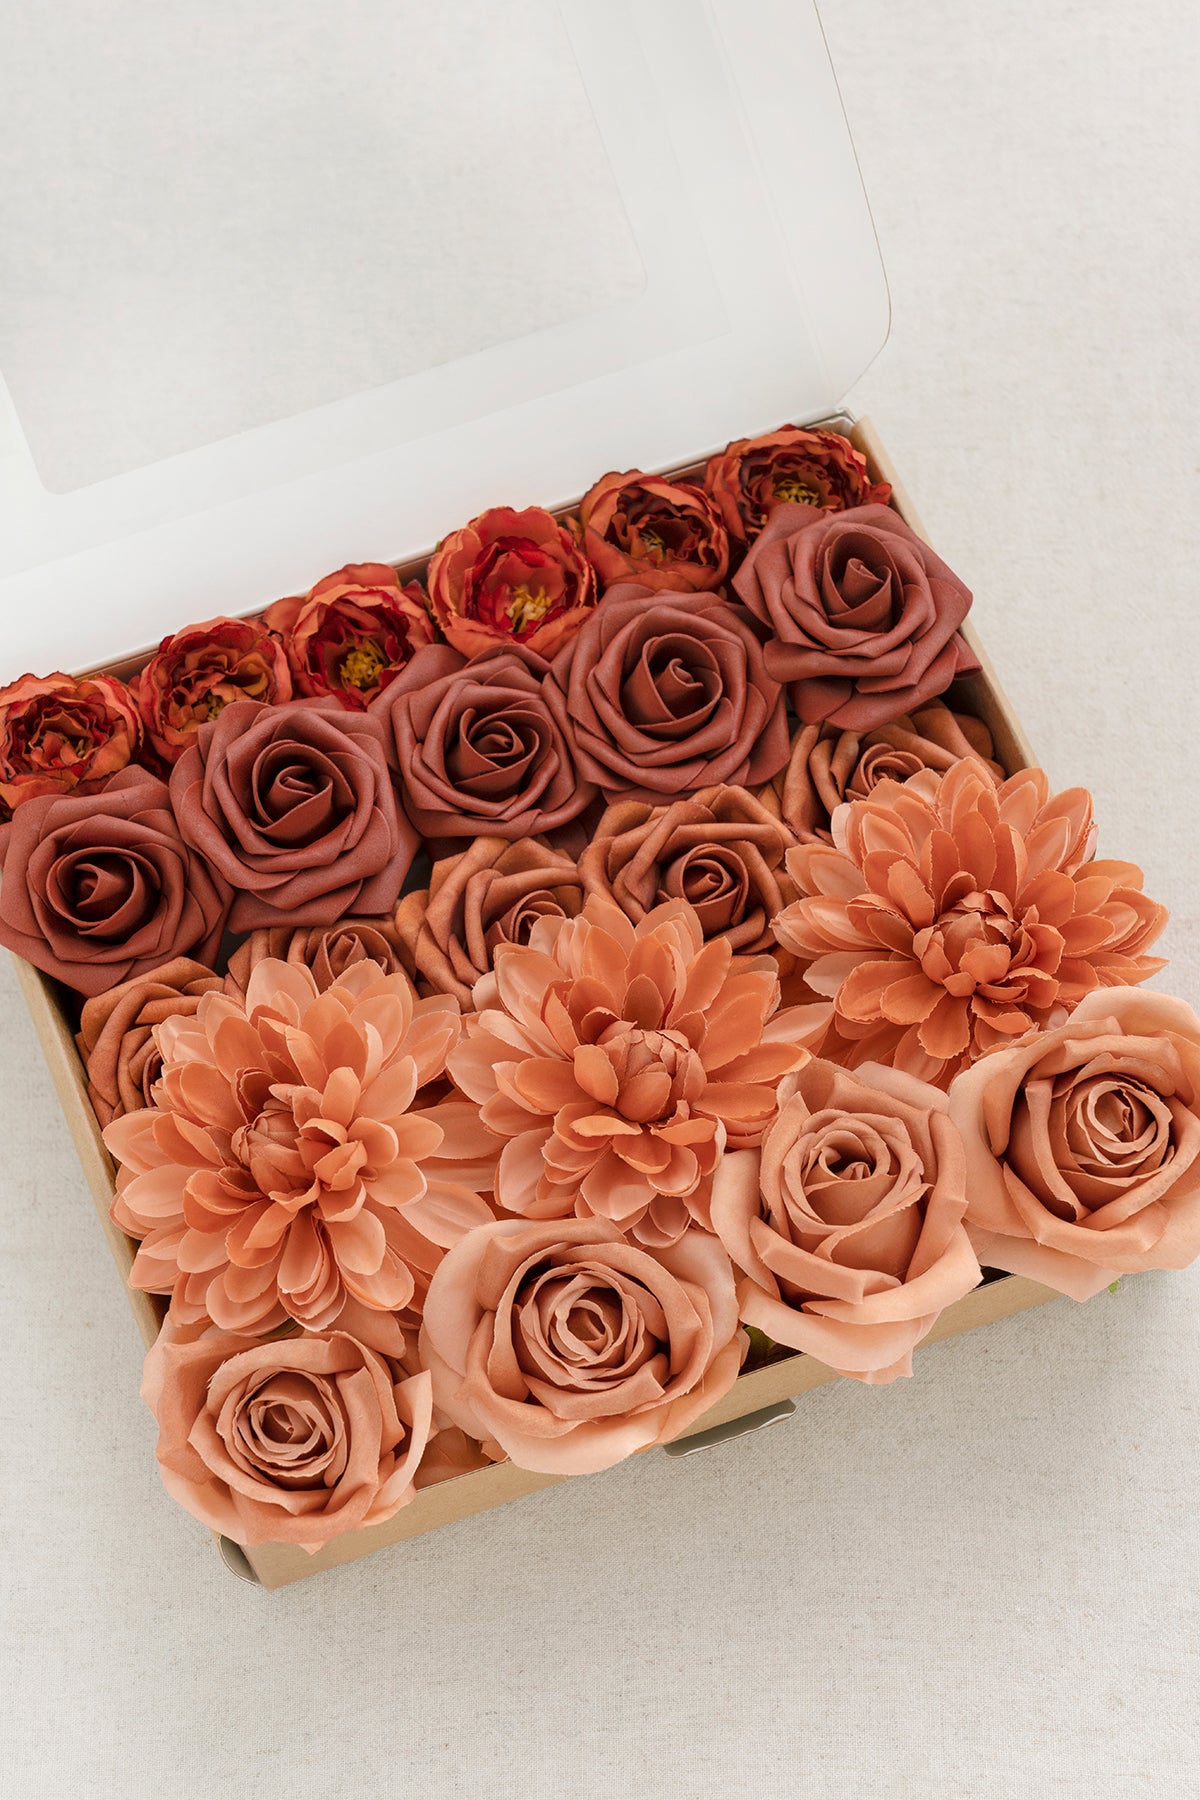 DIY Supporting Flower Boxes in Sunset Terracotta – Ling's Moment